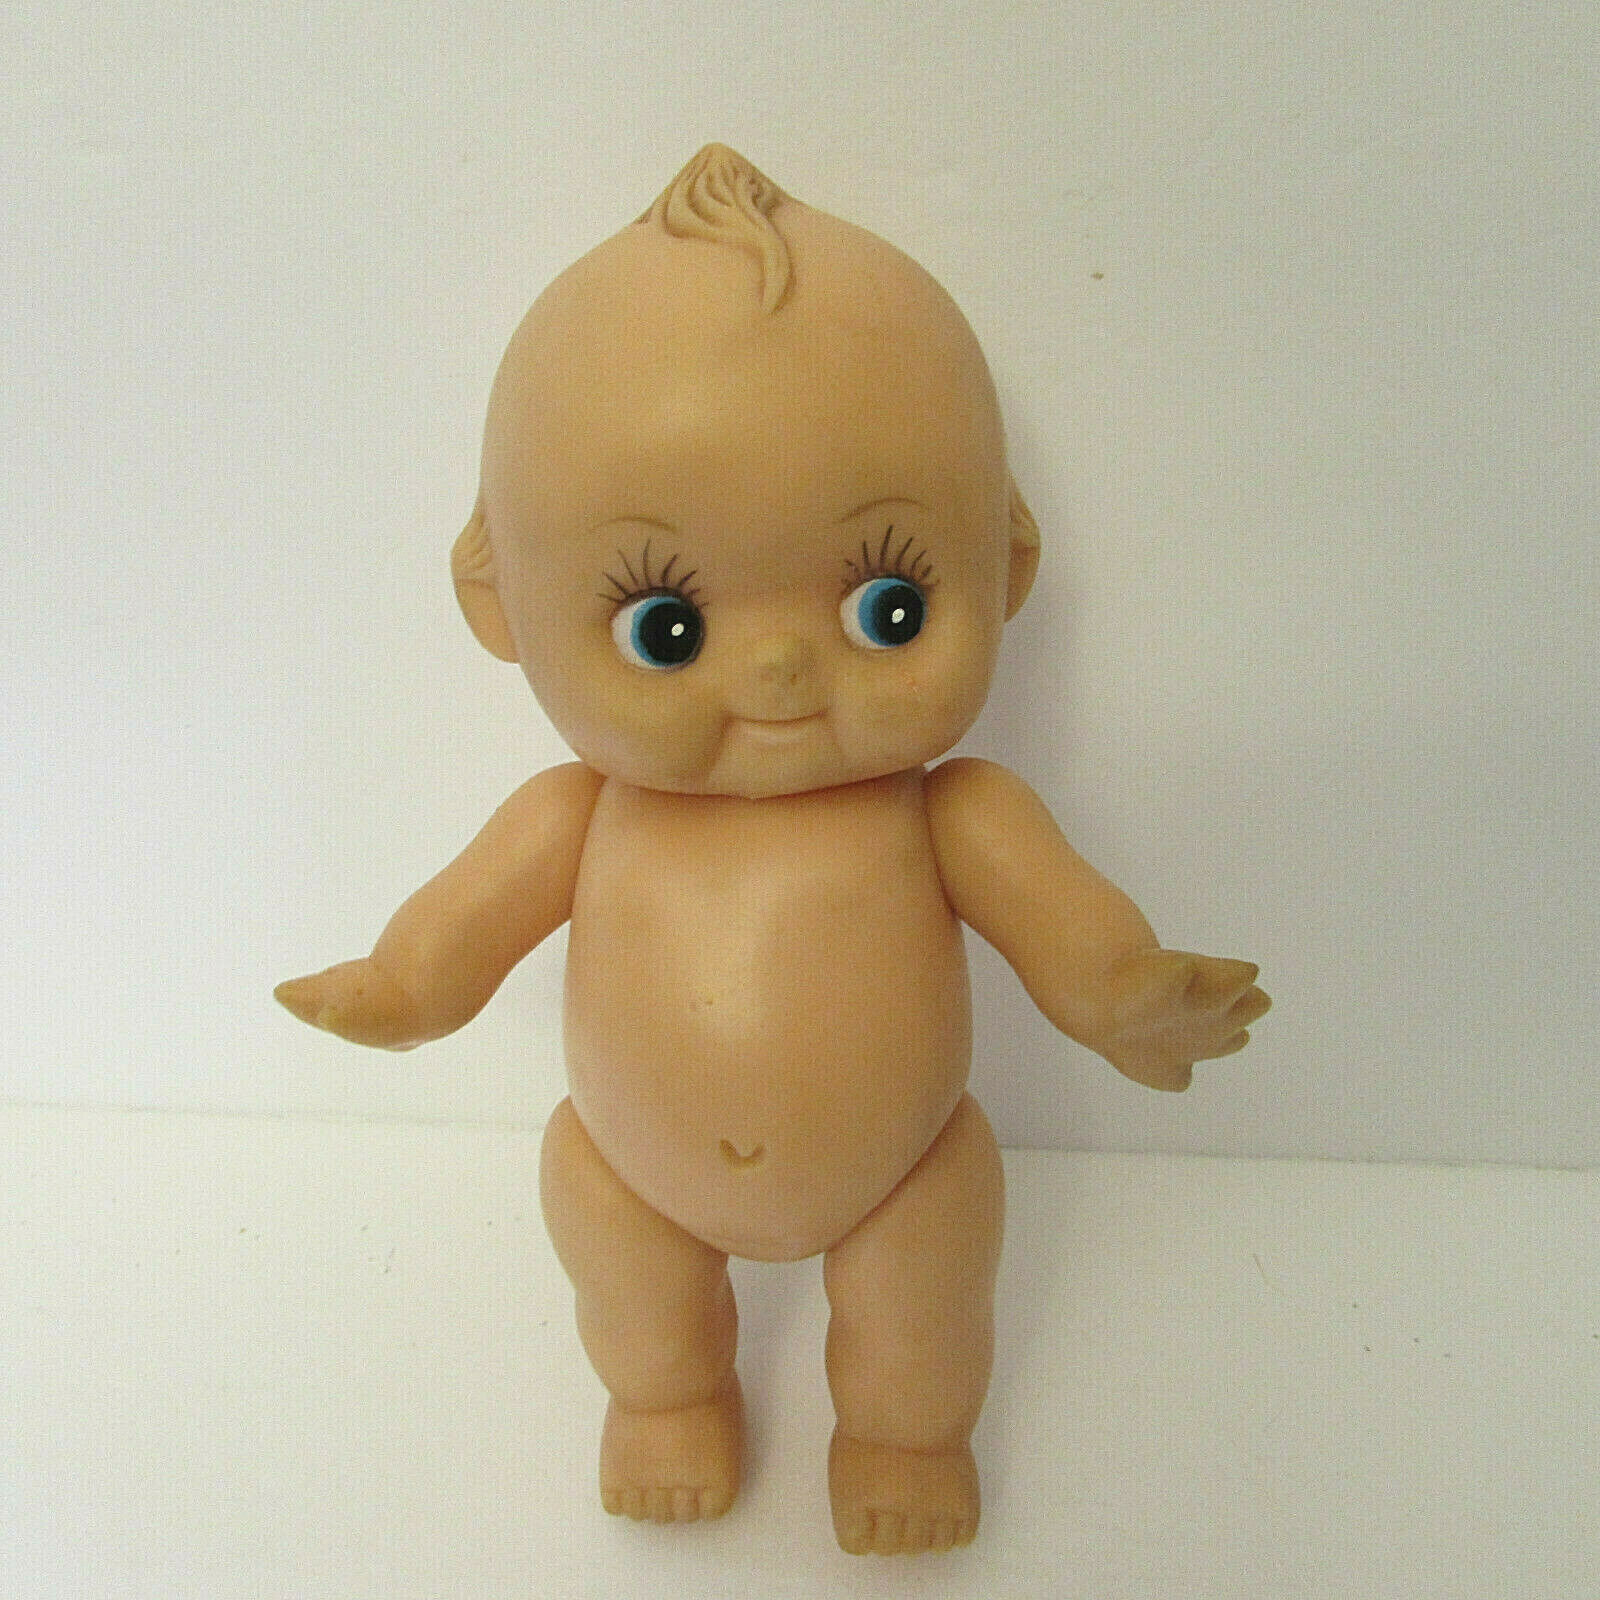 Vintage Kewpie Rubber Doll 8" Articulated  Made In Taiwan #10